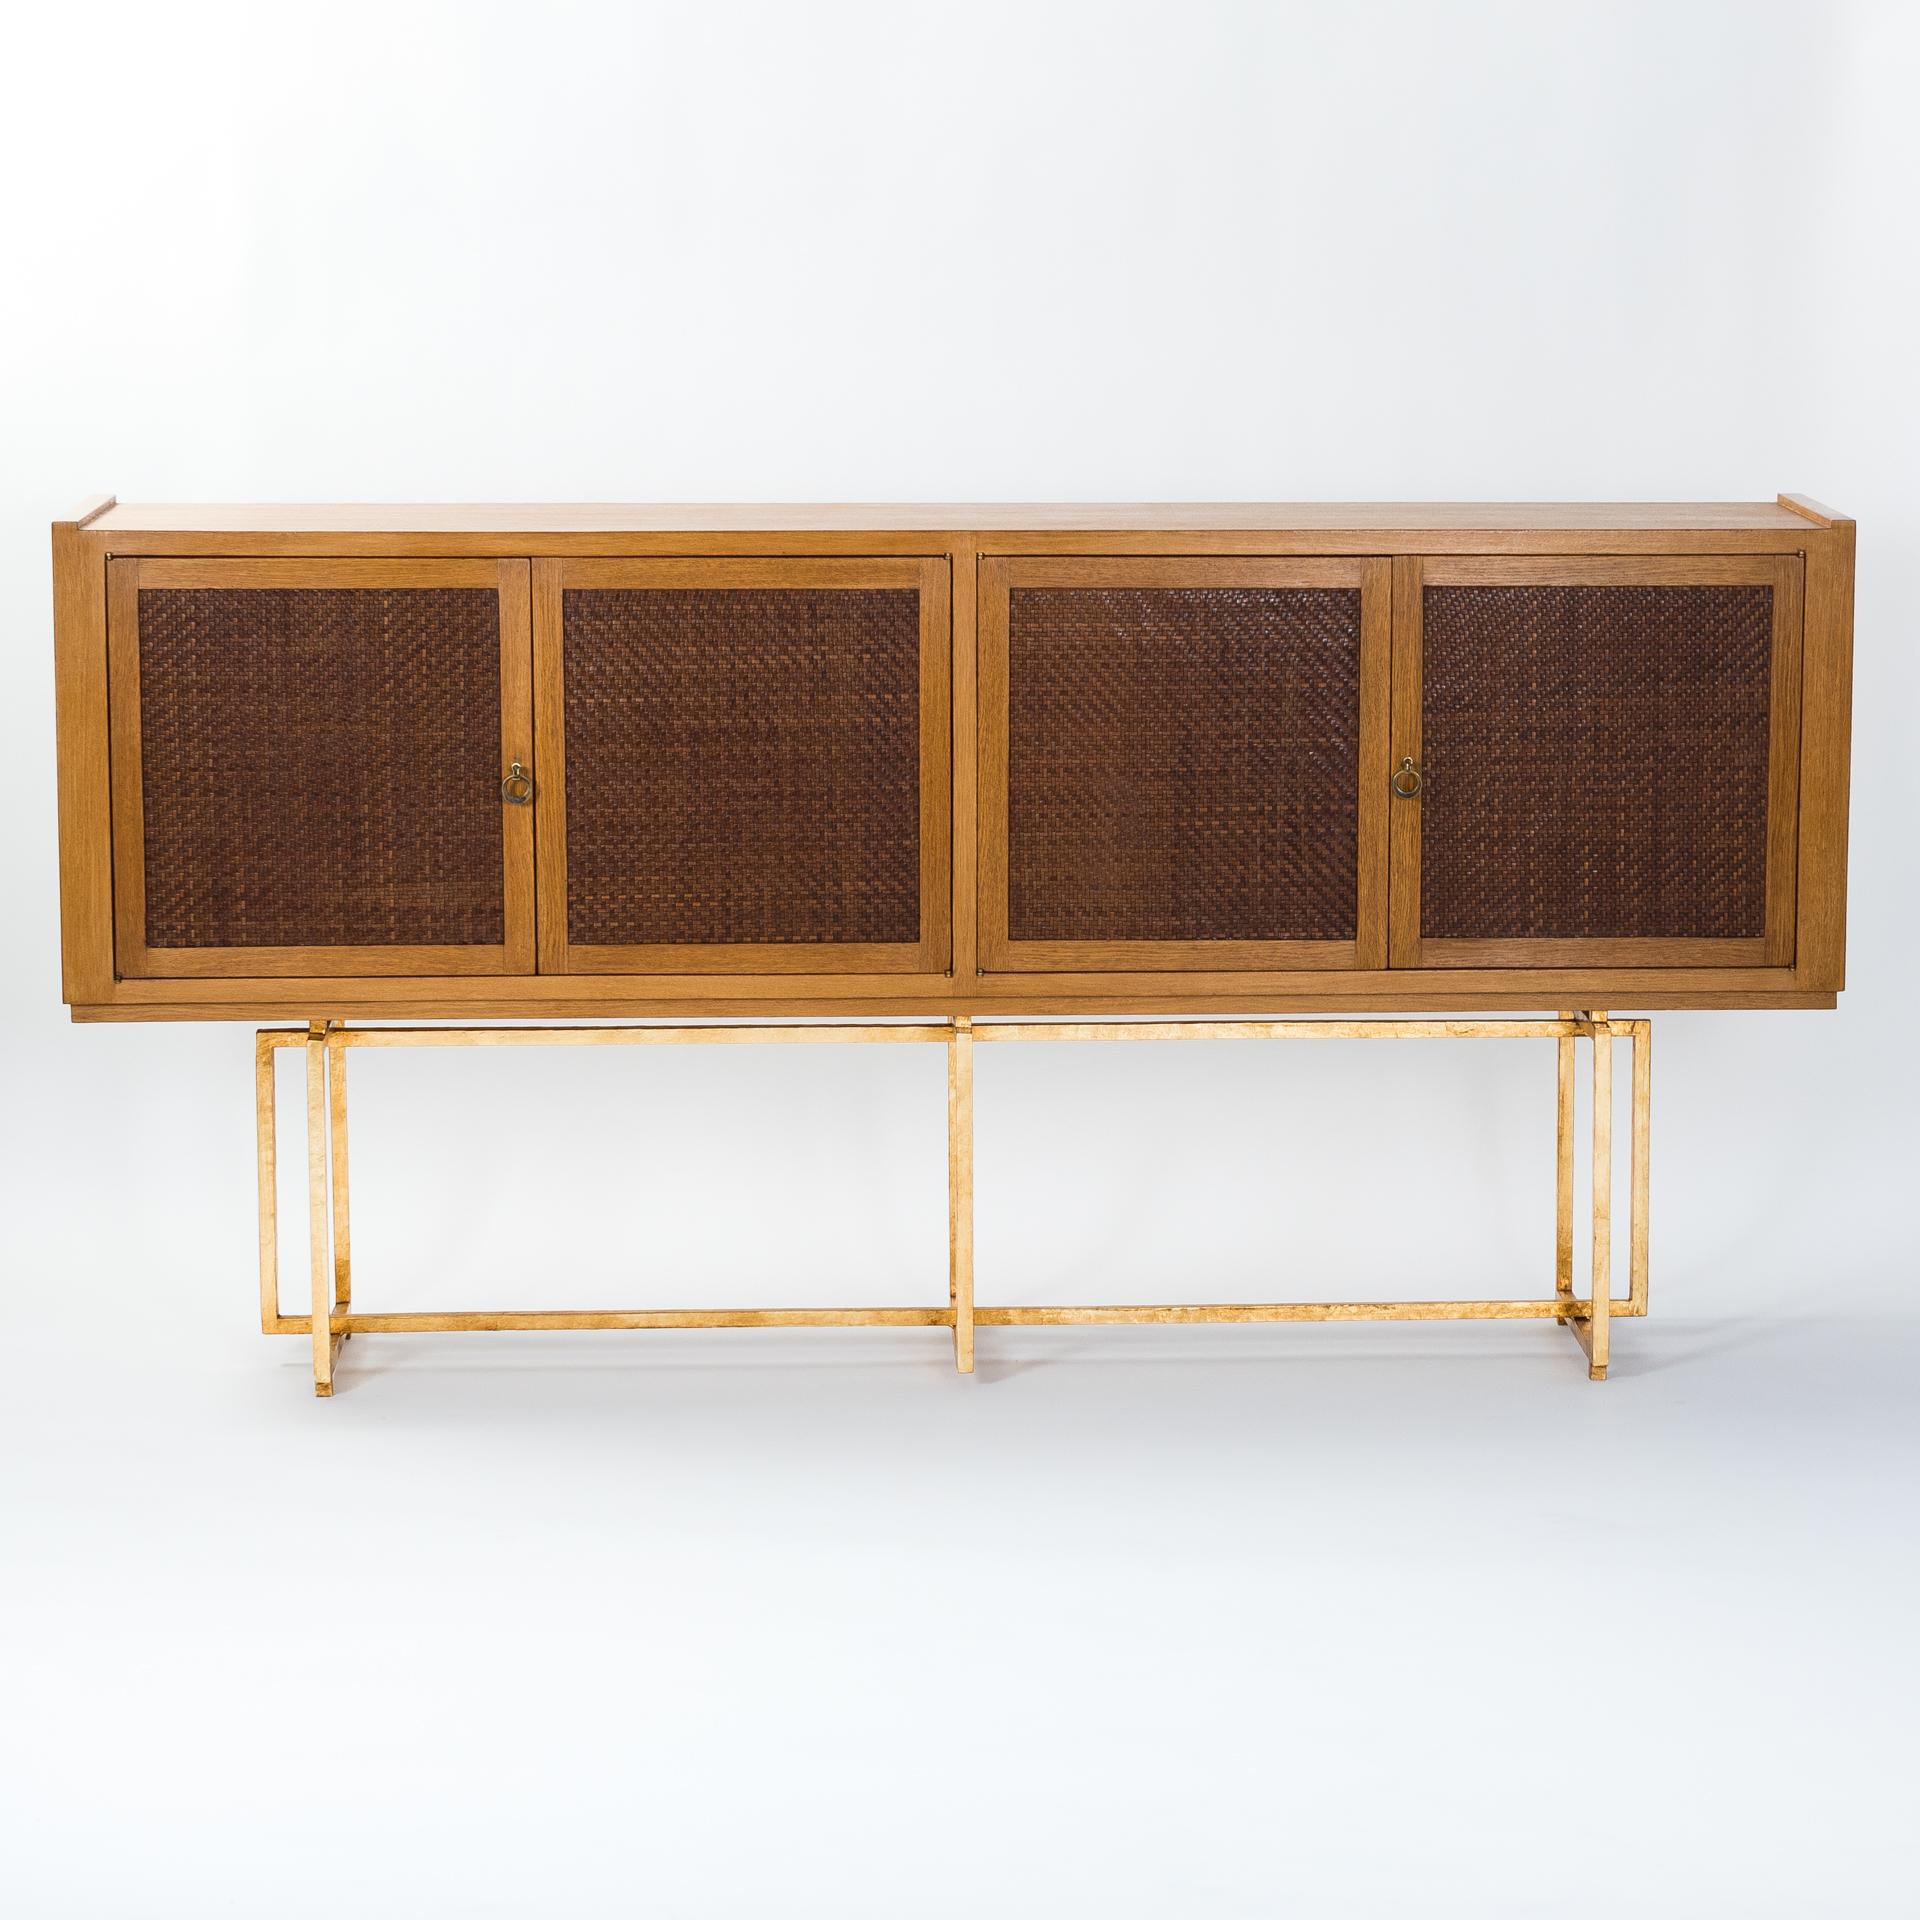 Straight-lined Italian sideboard from the 1960s on a geometric metal base.
The body is veneered with oak, the panels of the front doors are designed with braided fine leather straps - a beautiful ajouré work.
The base is made of rectangular iron